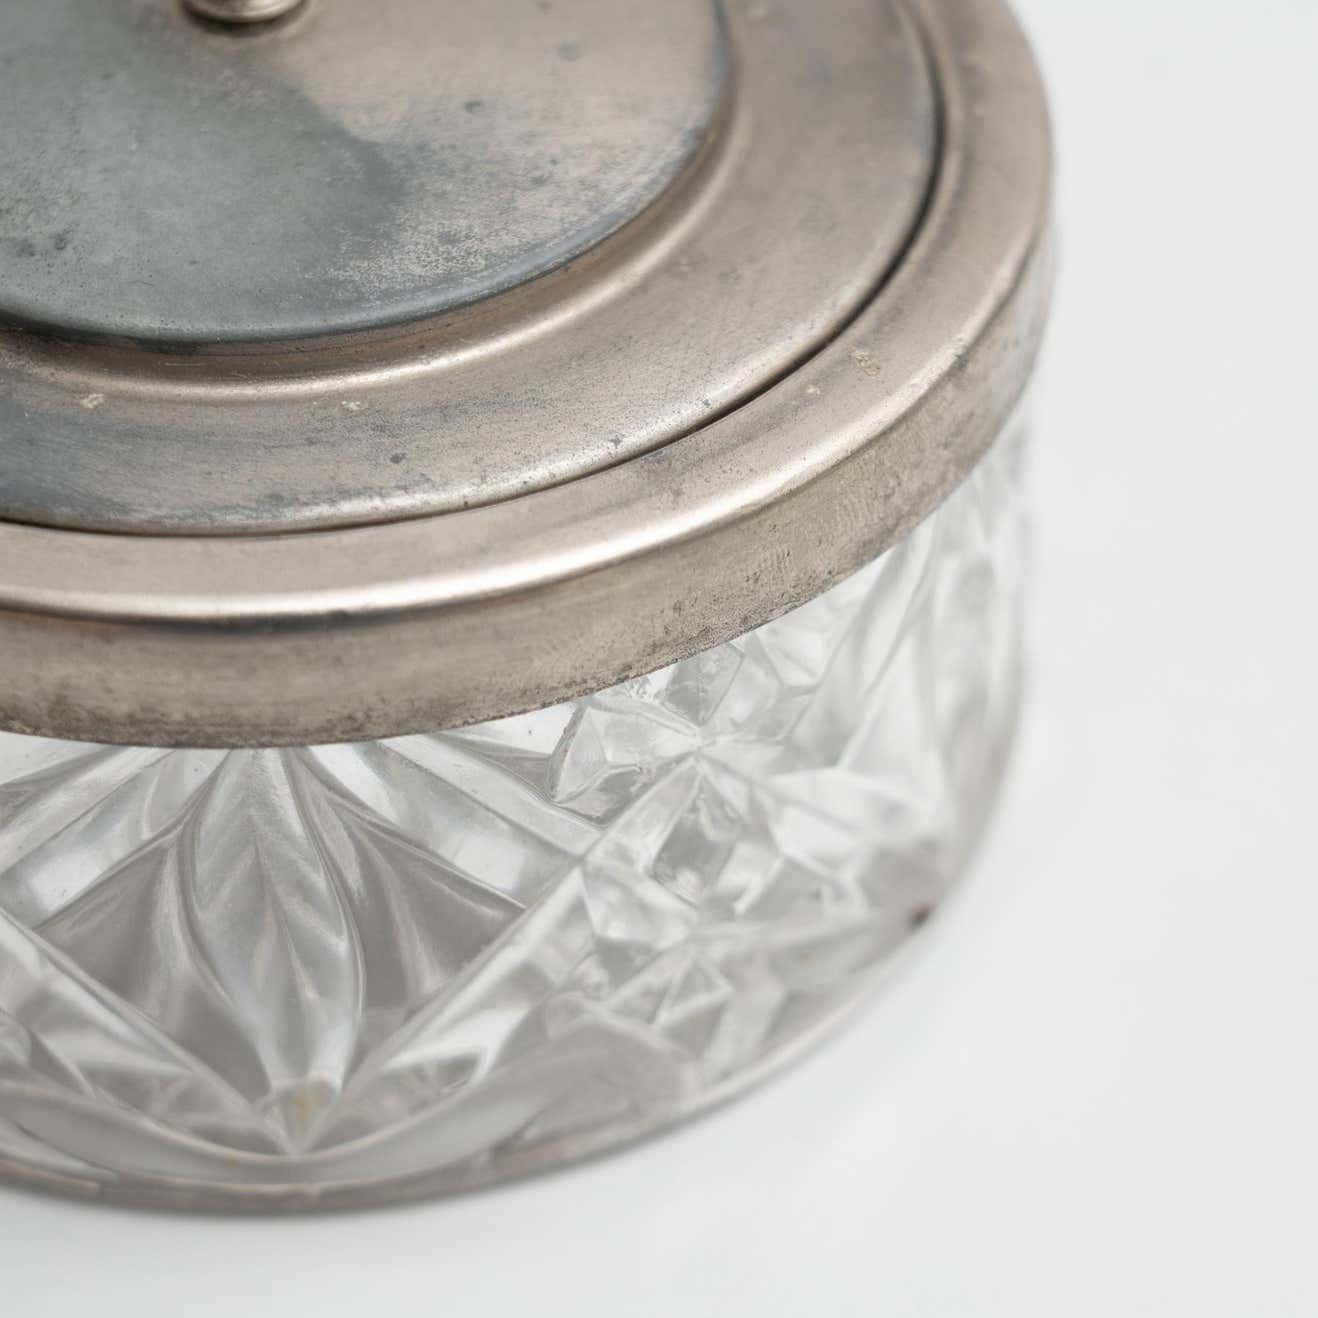 Early 20th Century Antique Victorian Metal and Glass Lidded Sugar Pot For Sale 3